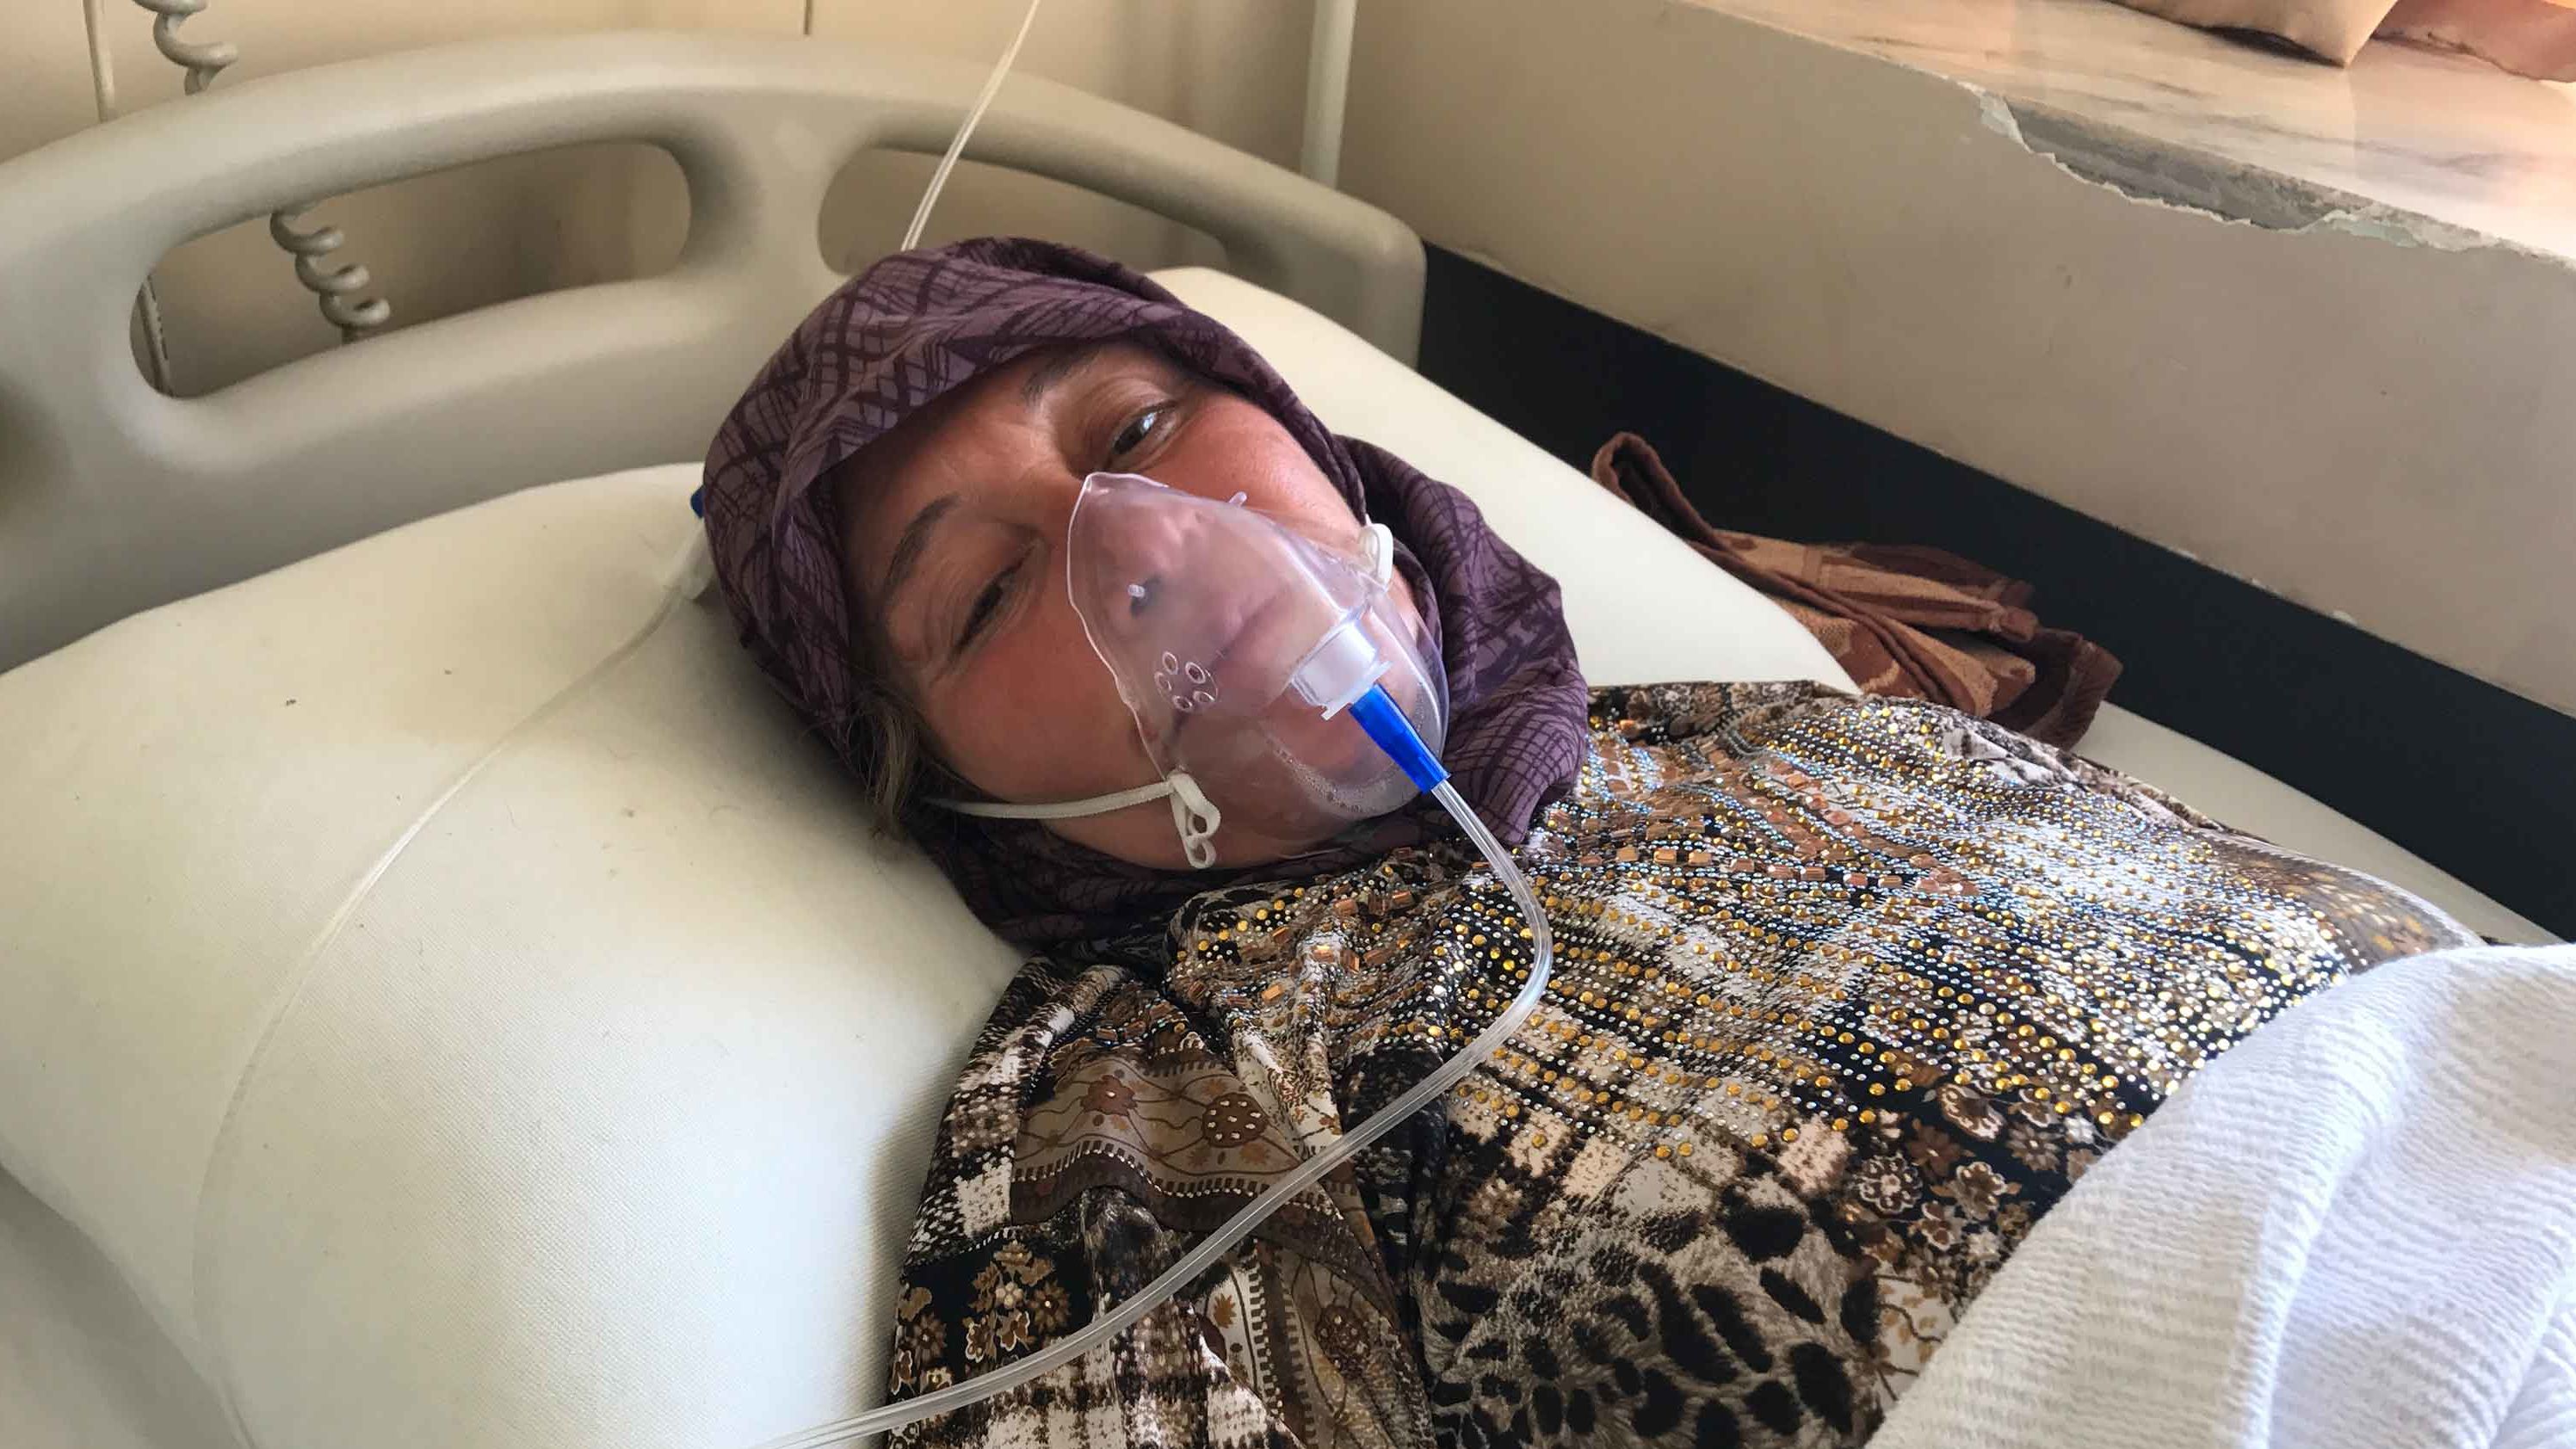 55-year-old Aisha al-Tilawi recovers at a south Turkey hospital the day after the attack.